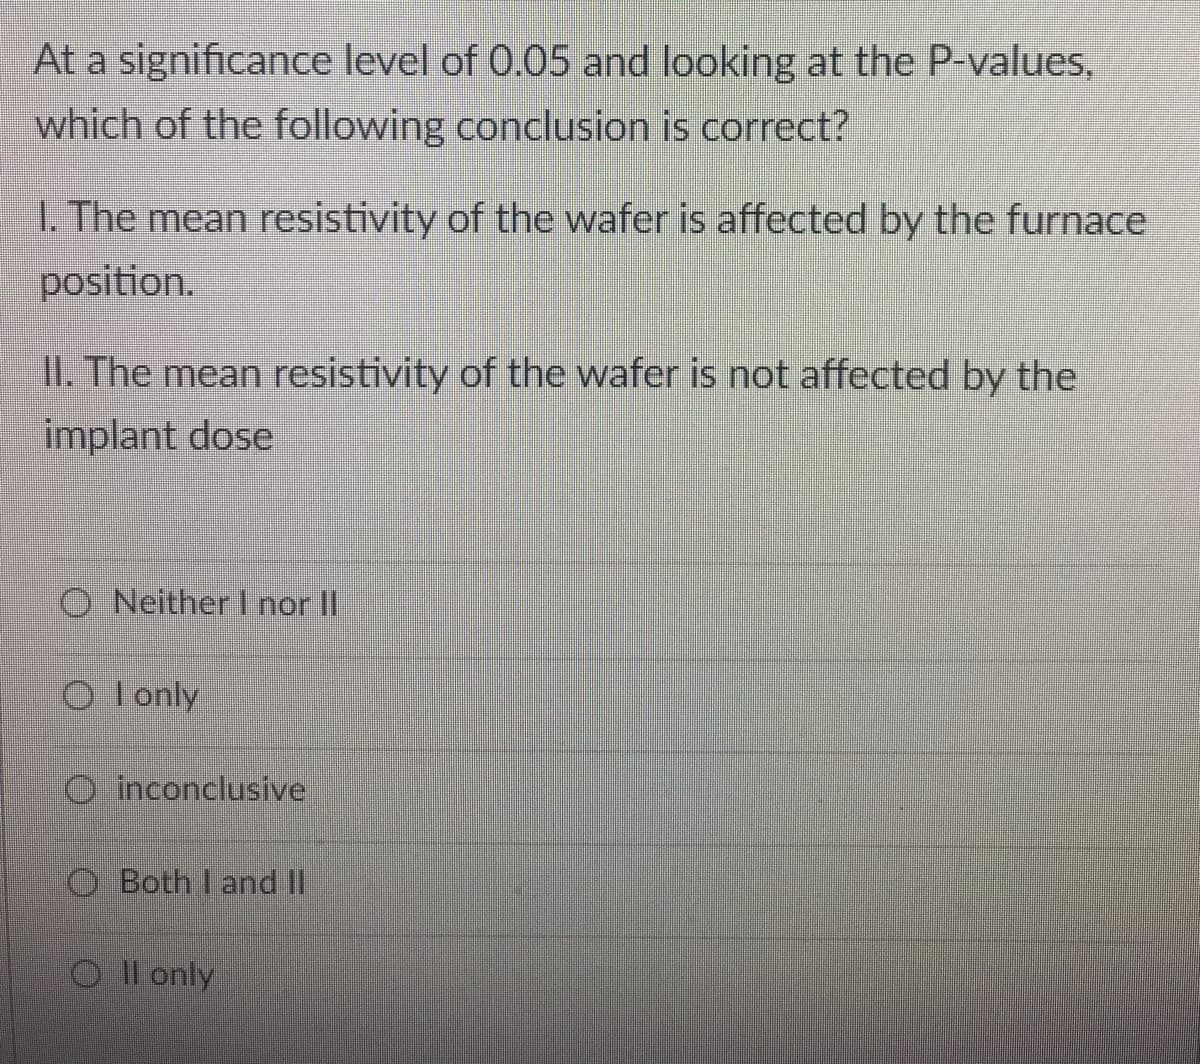 At a significance level of 0.05 and looking at the P-values,
which of the following conclusion is correct?
1. The mean resistivity of the wafer is affected by the furnace
position.
II. The mean resistivity of the wafer is not affected by the
implant dose
O Neither I nor II
O lonly
O inconclusive
O Both I and II
O Il only
